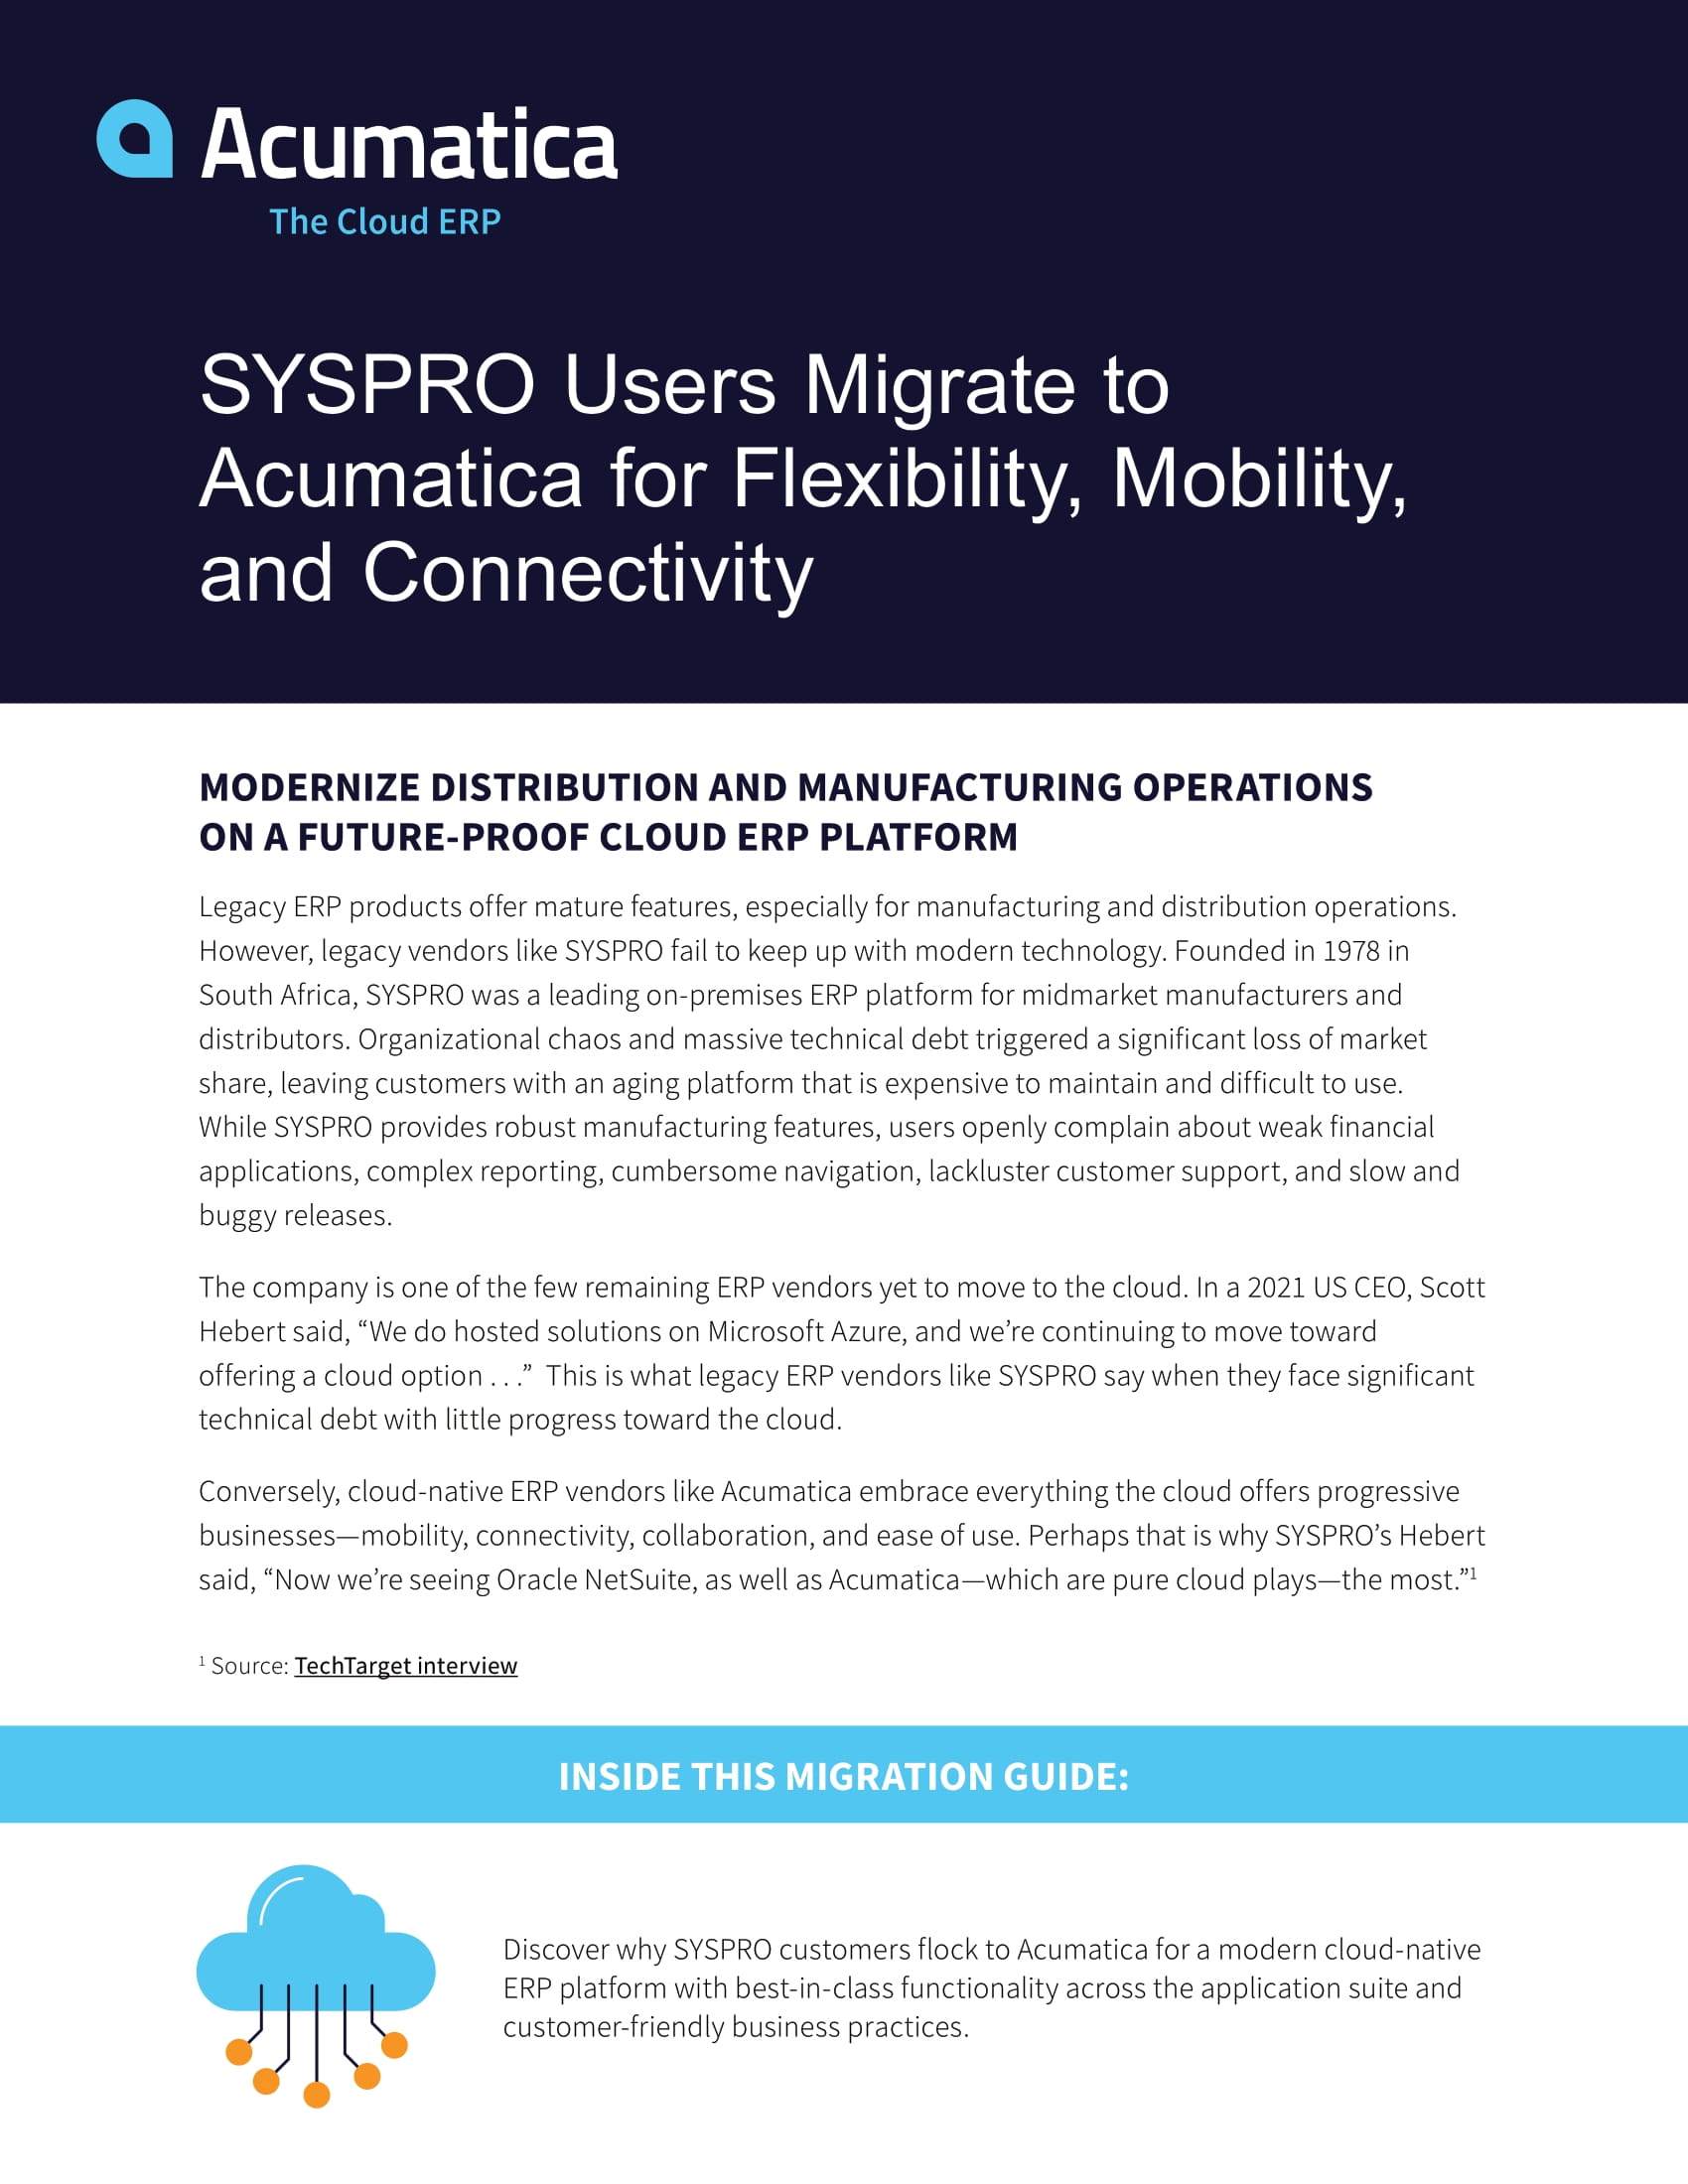 What’s Causing a SYSPRO Migration?